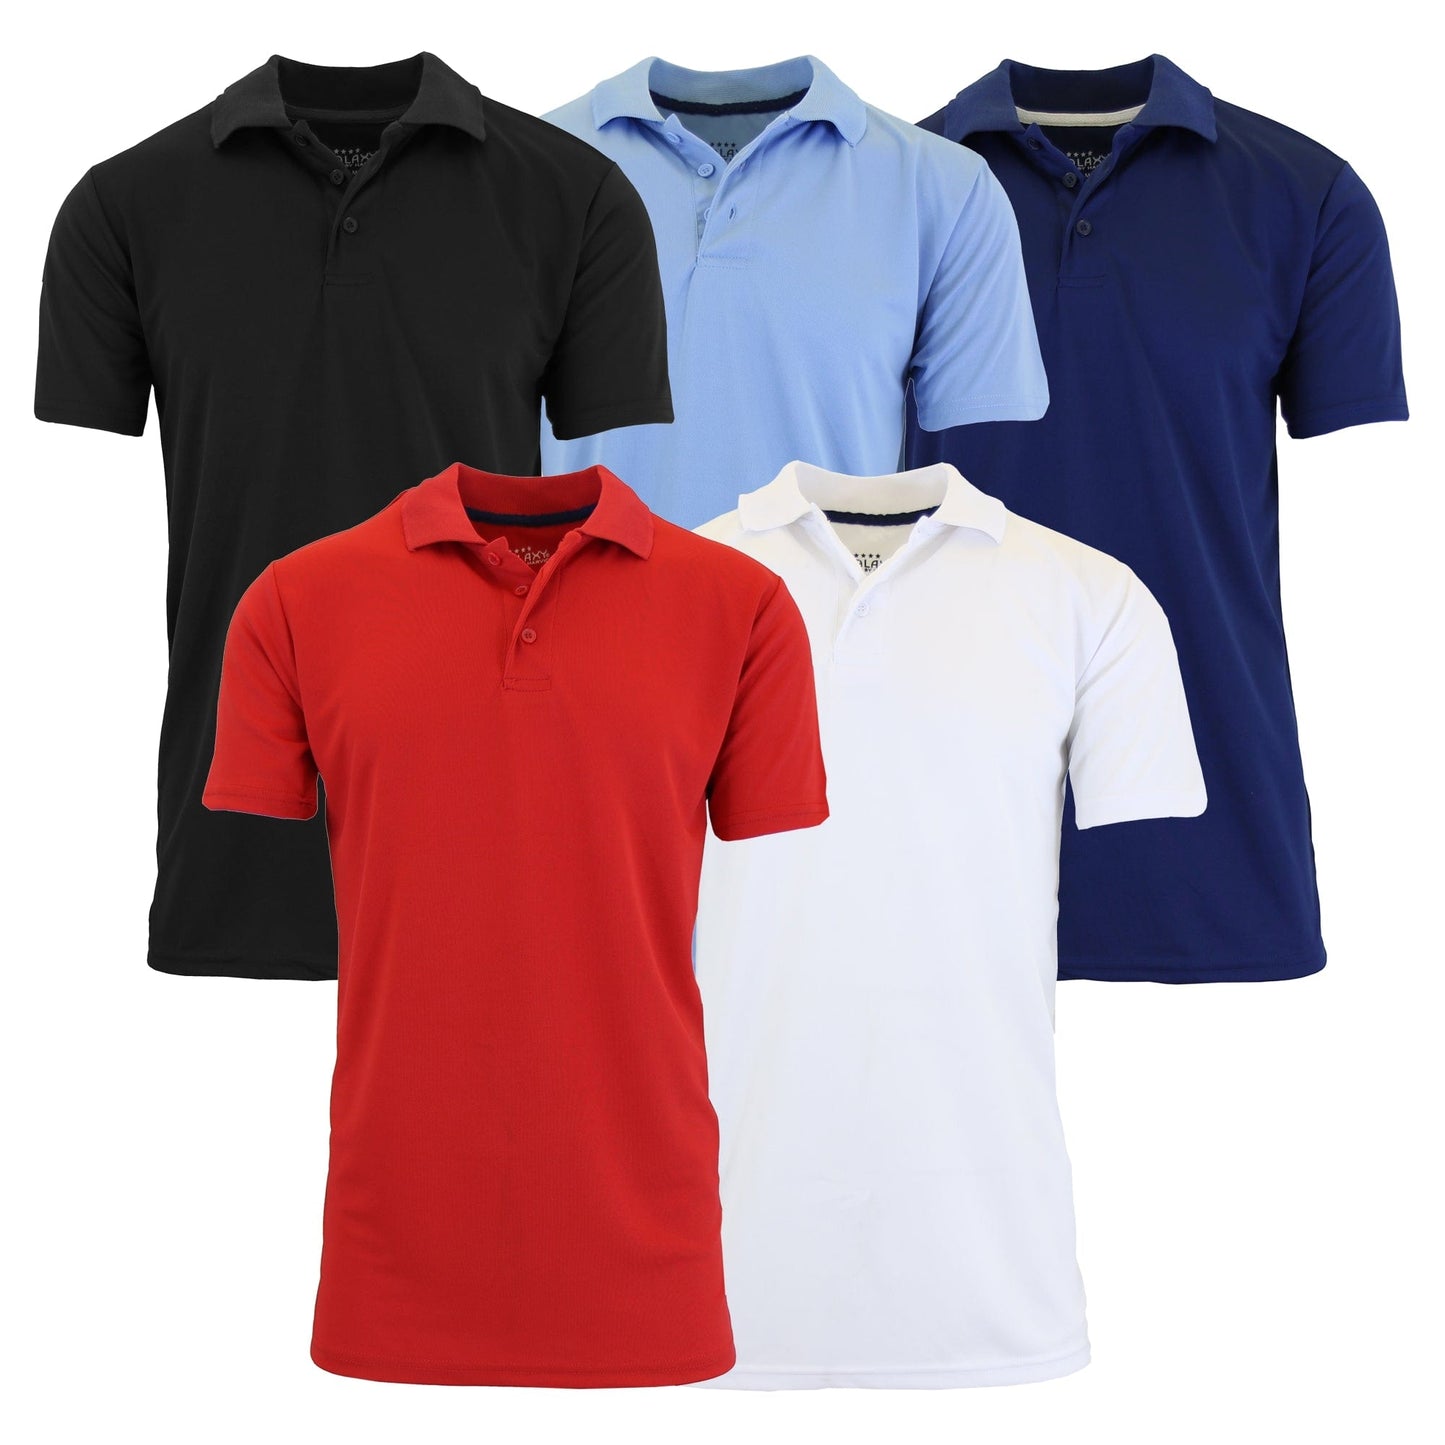 5-Pack Men's Dry Fit Moisture-Wicking Polo Shirt (S-3XL)